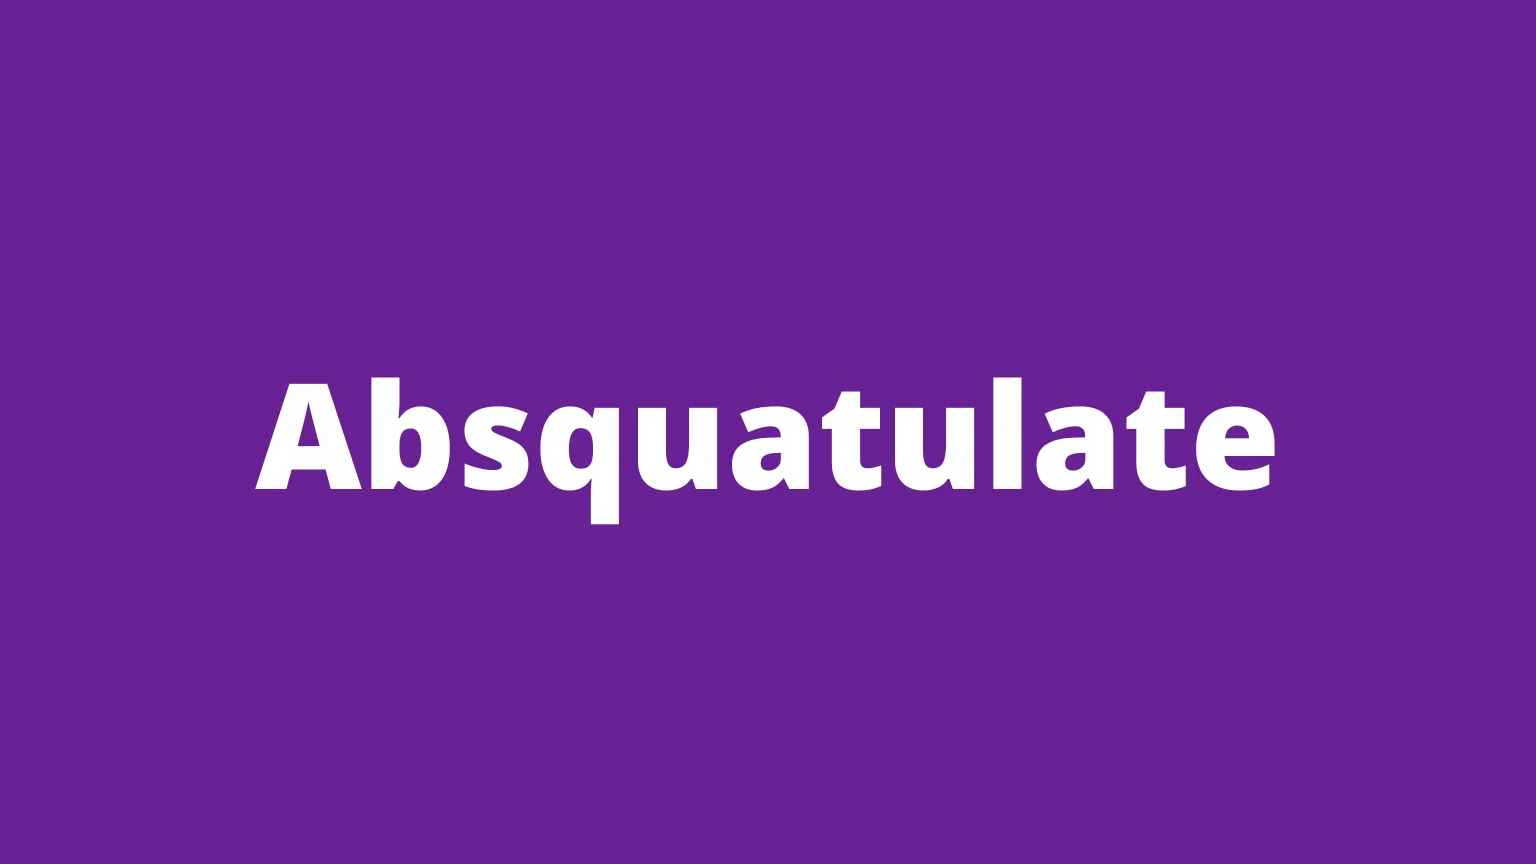 The word absquatulate and its meaning